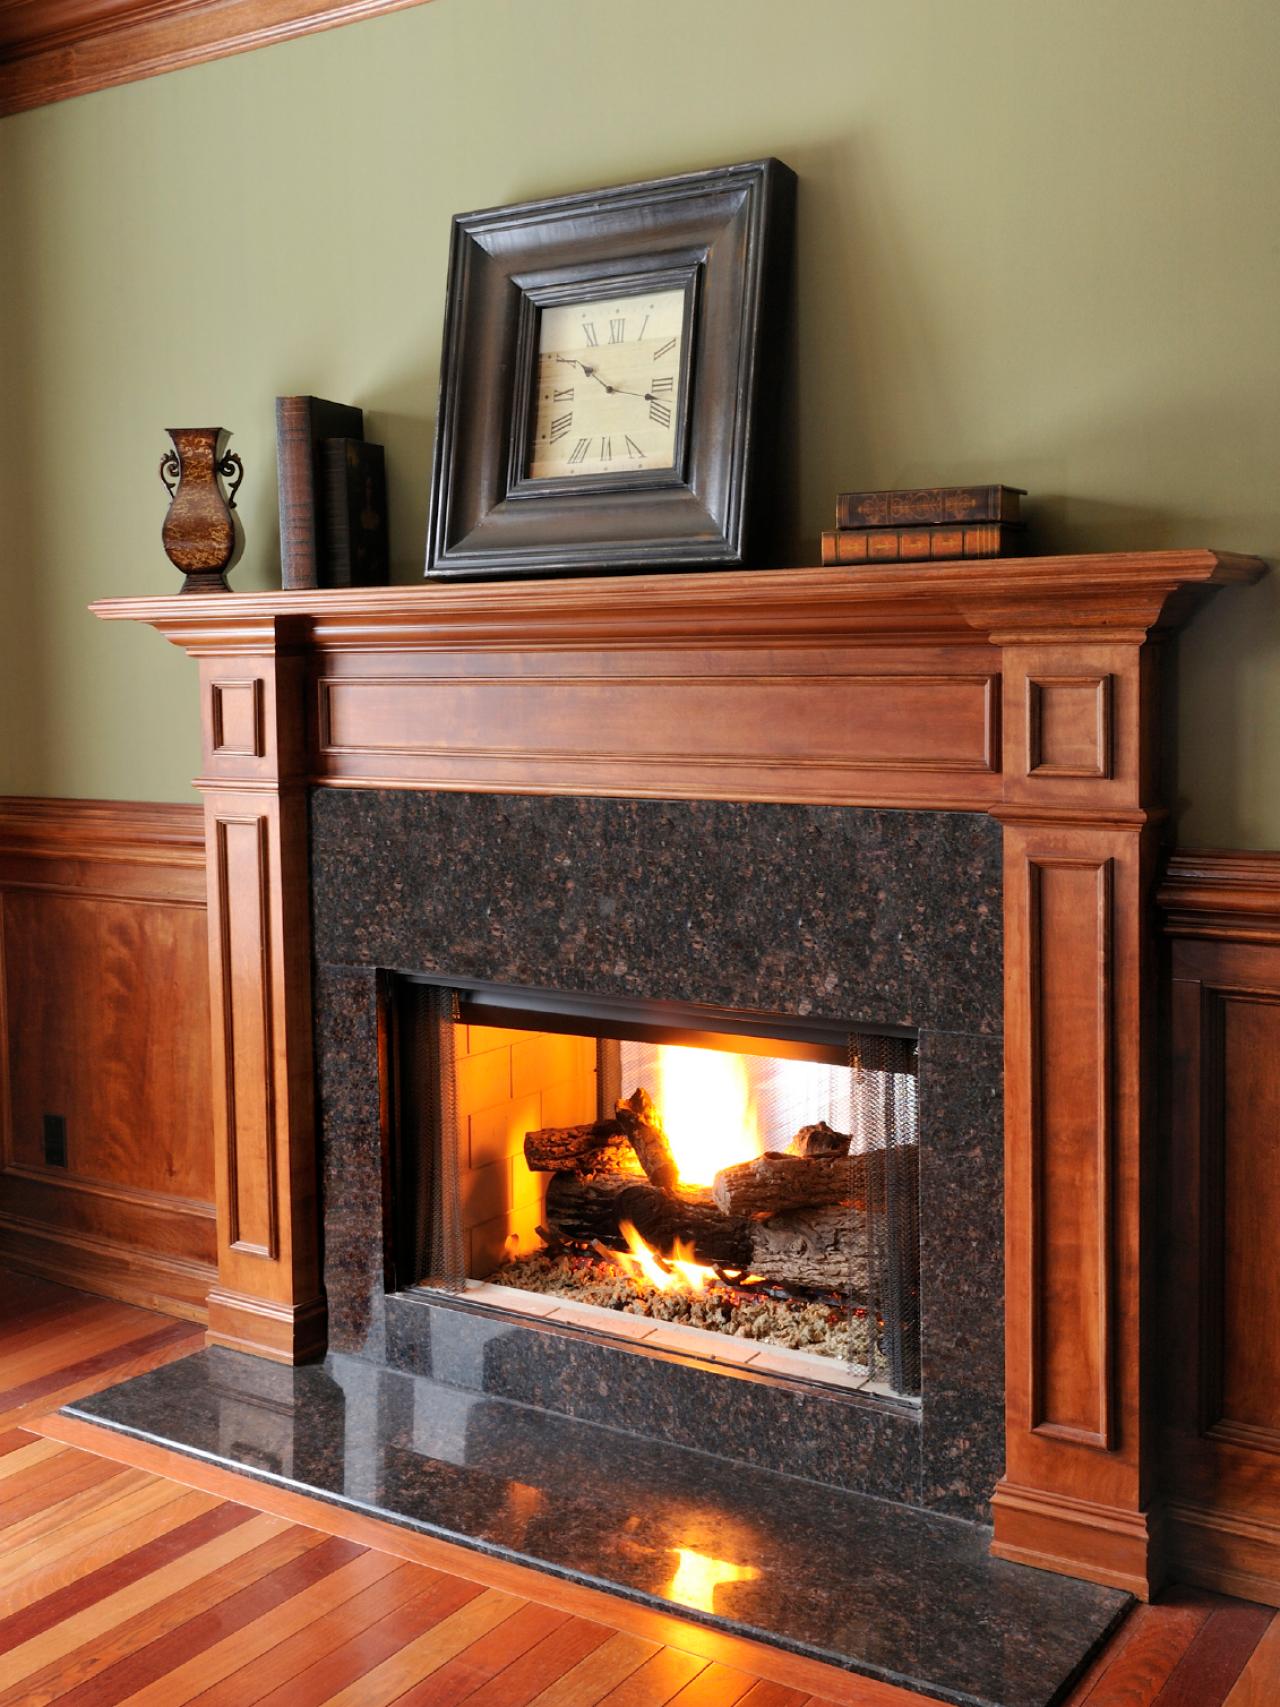 All About Fireplaces and Fireplace Surrounds | DIY